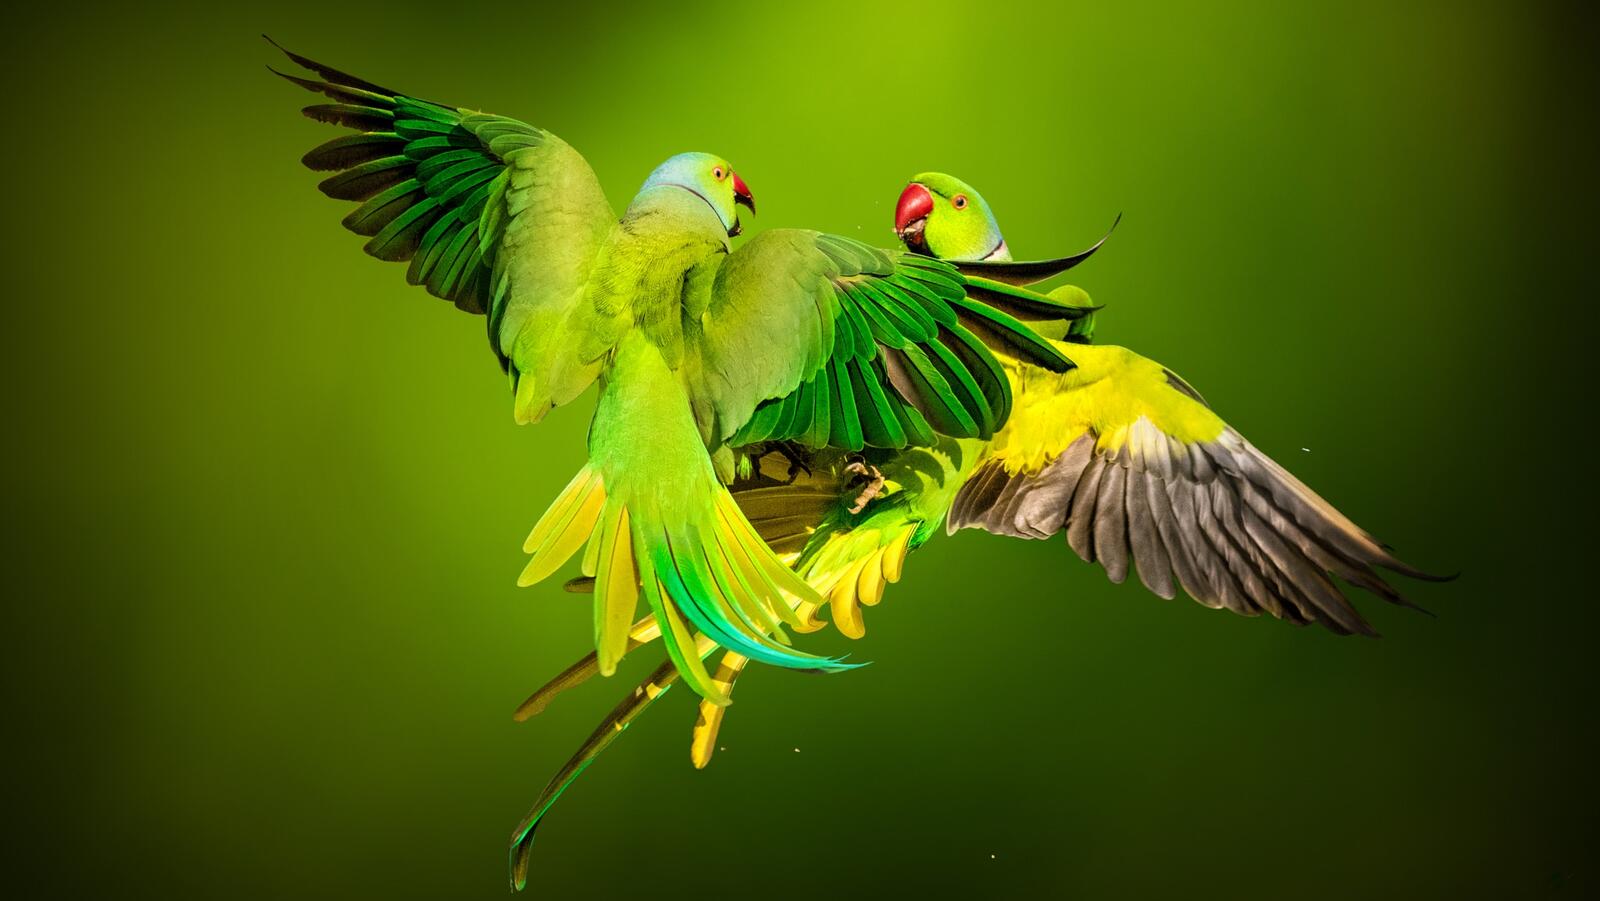 Wallpapers Rose Ringed Parrots parrot green background on the desktop